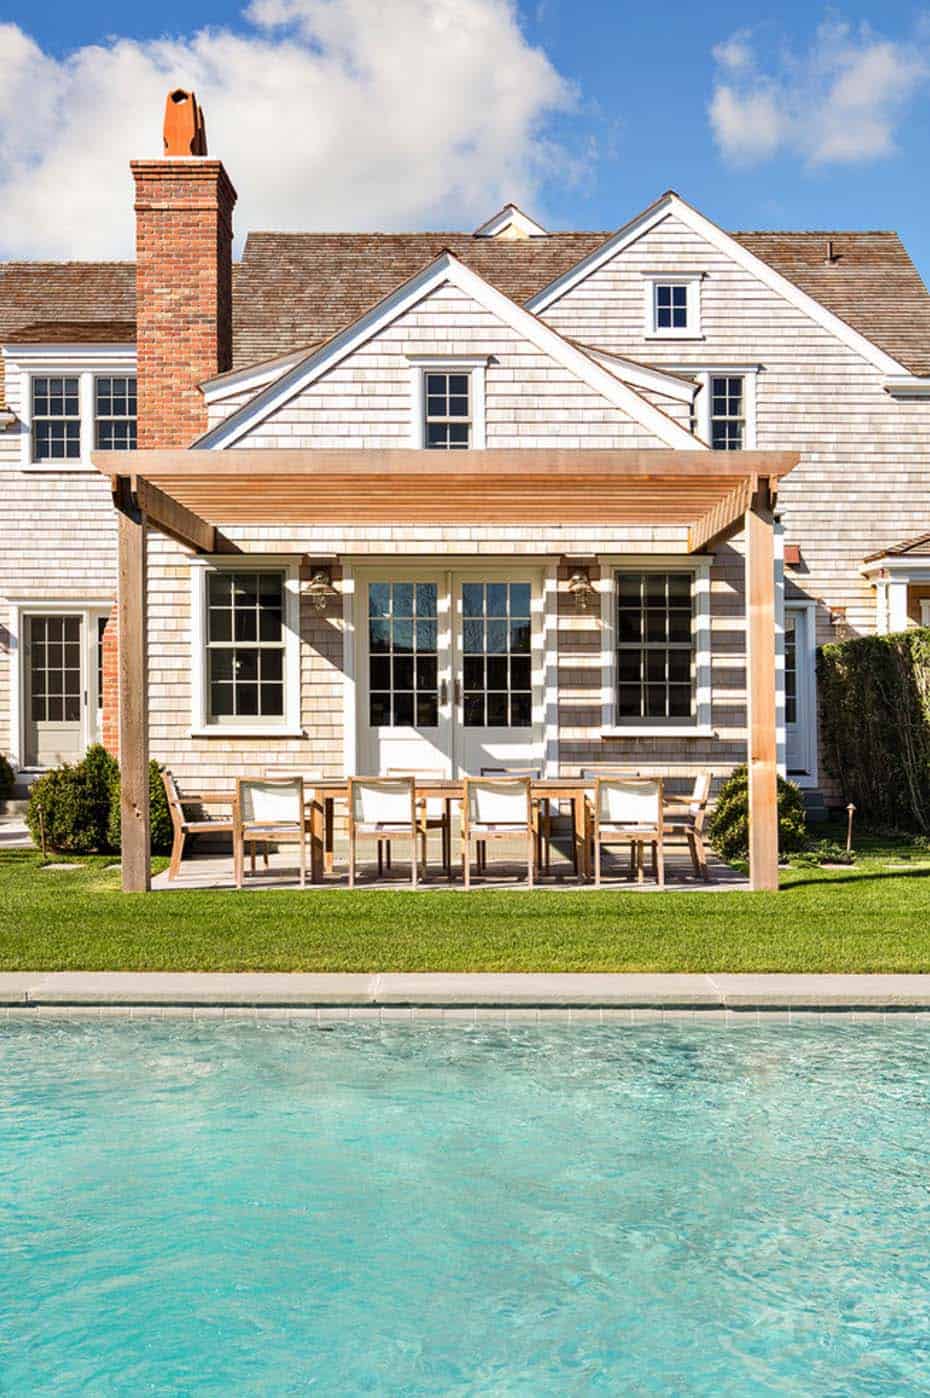 Shingle Style House With Beach Chic, Nantucket Style Beach House Plans